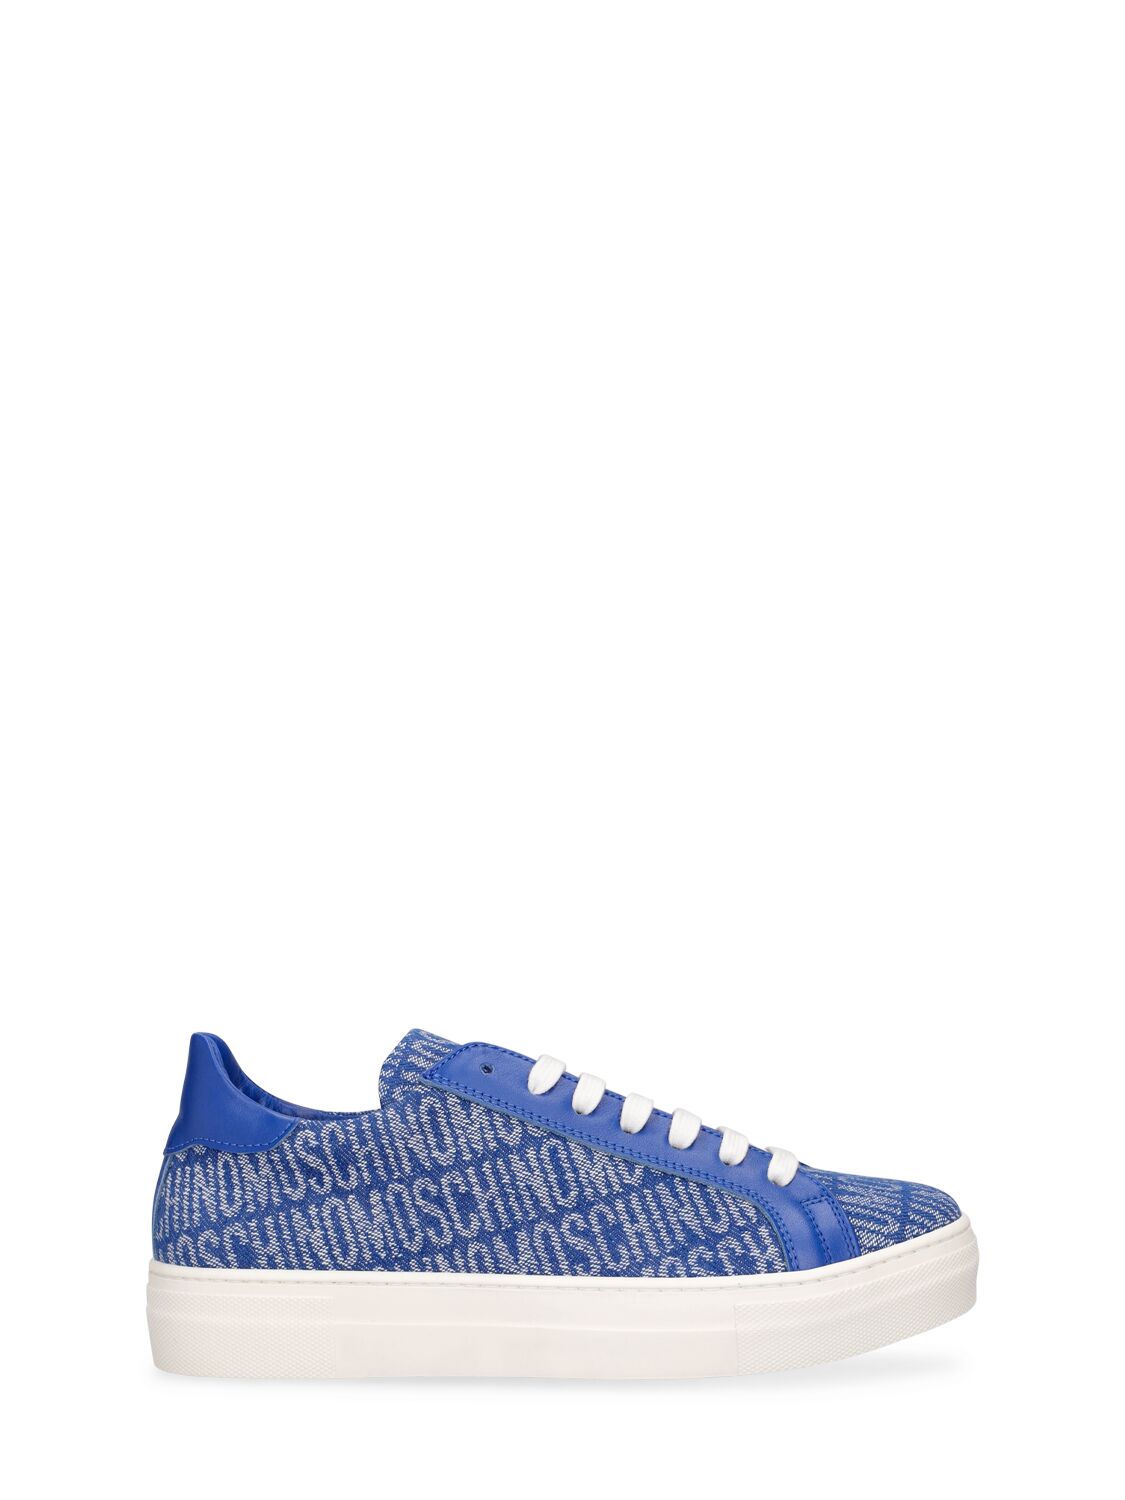 Image of Leather & Denim Lace-up Sneakers